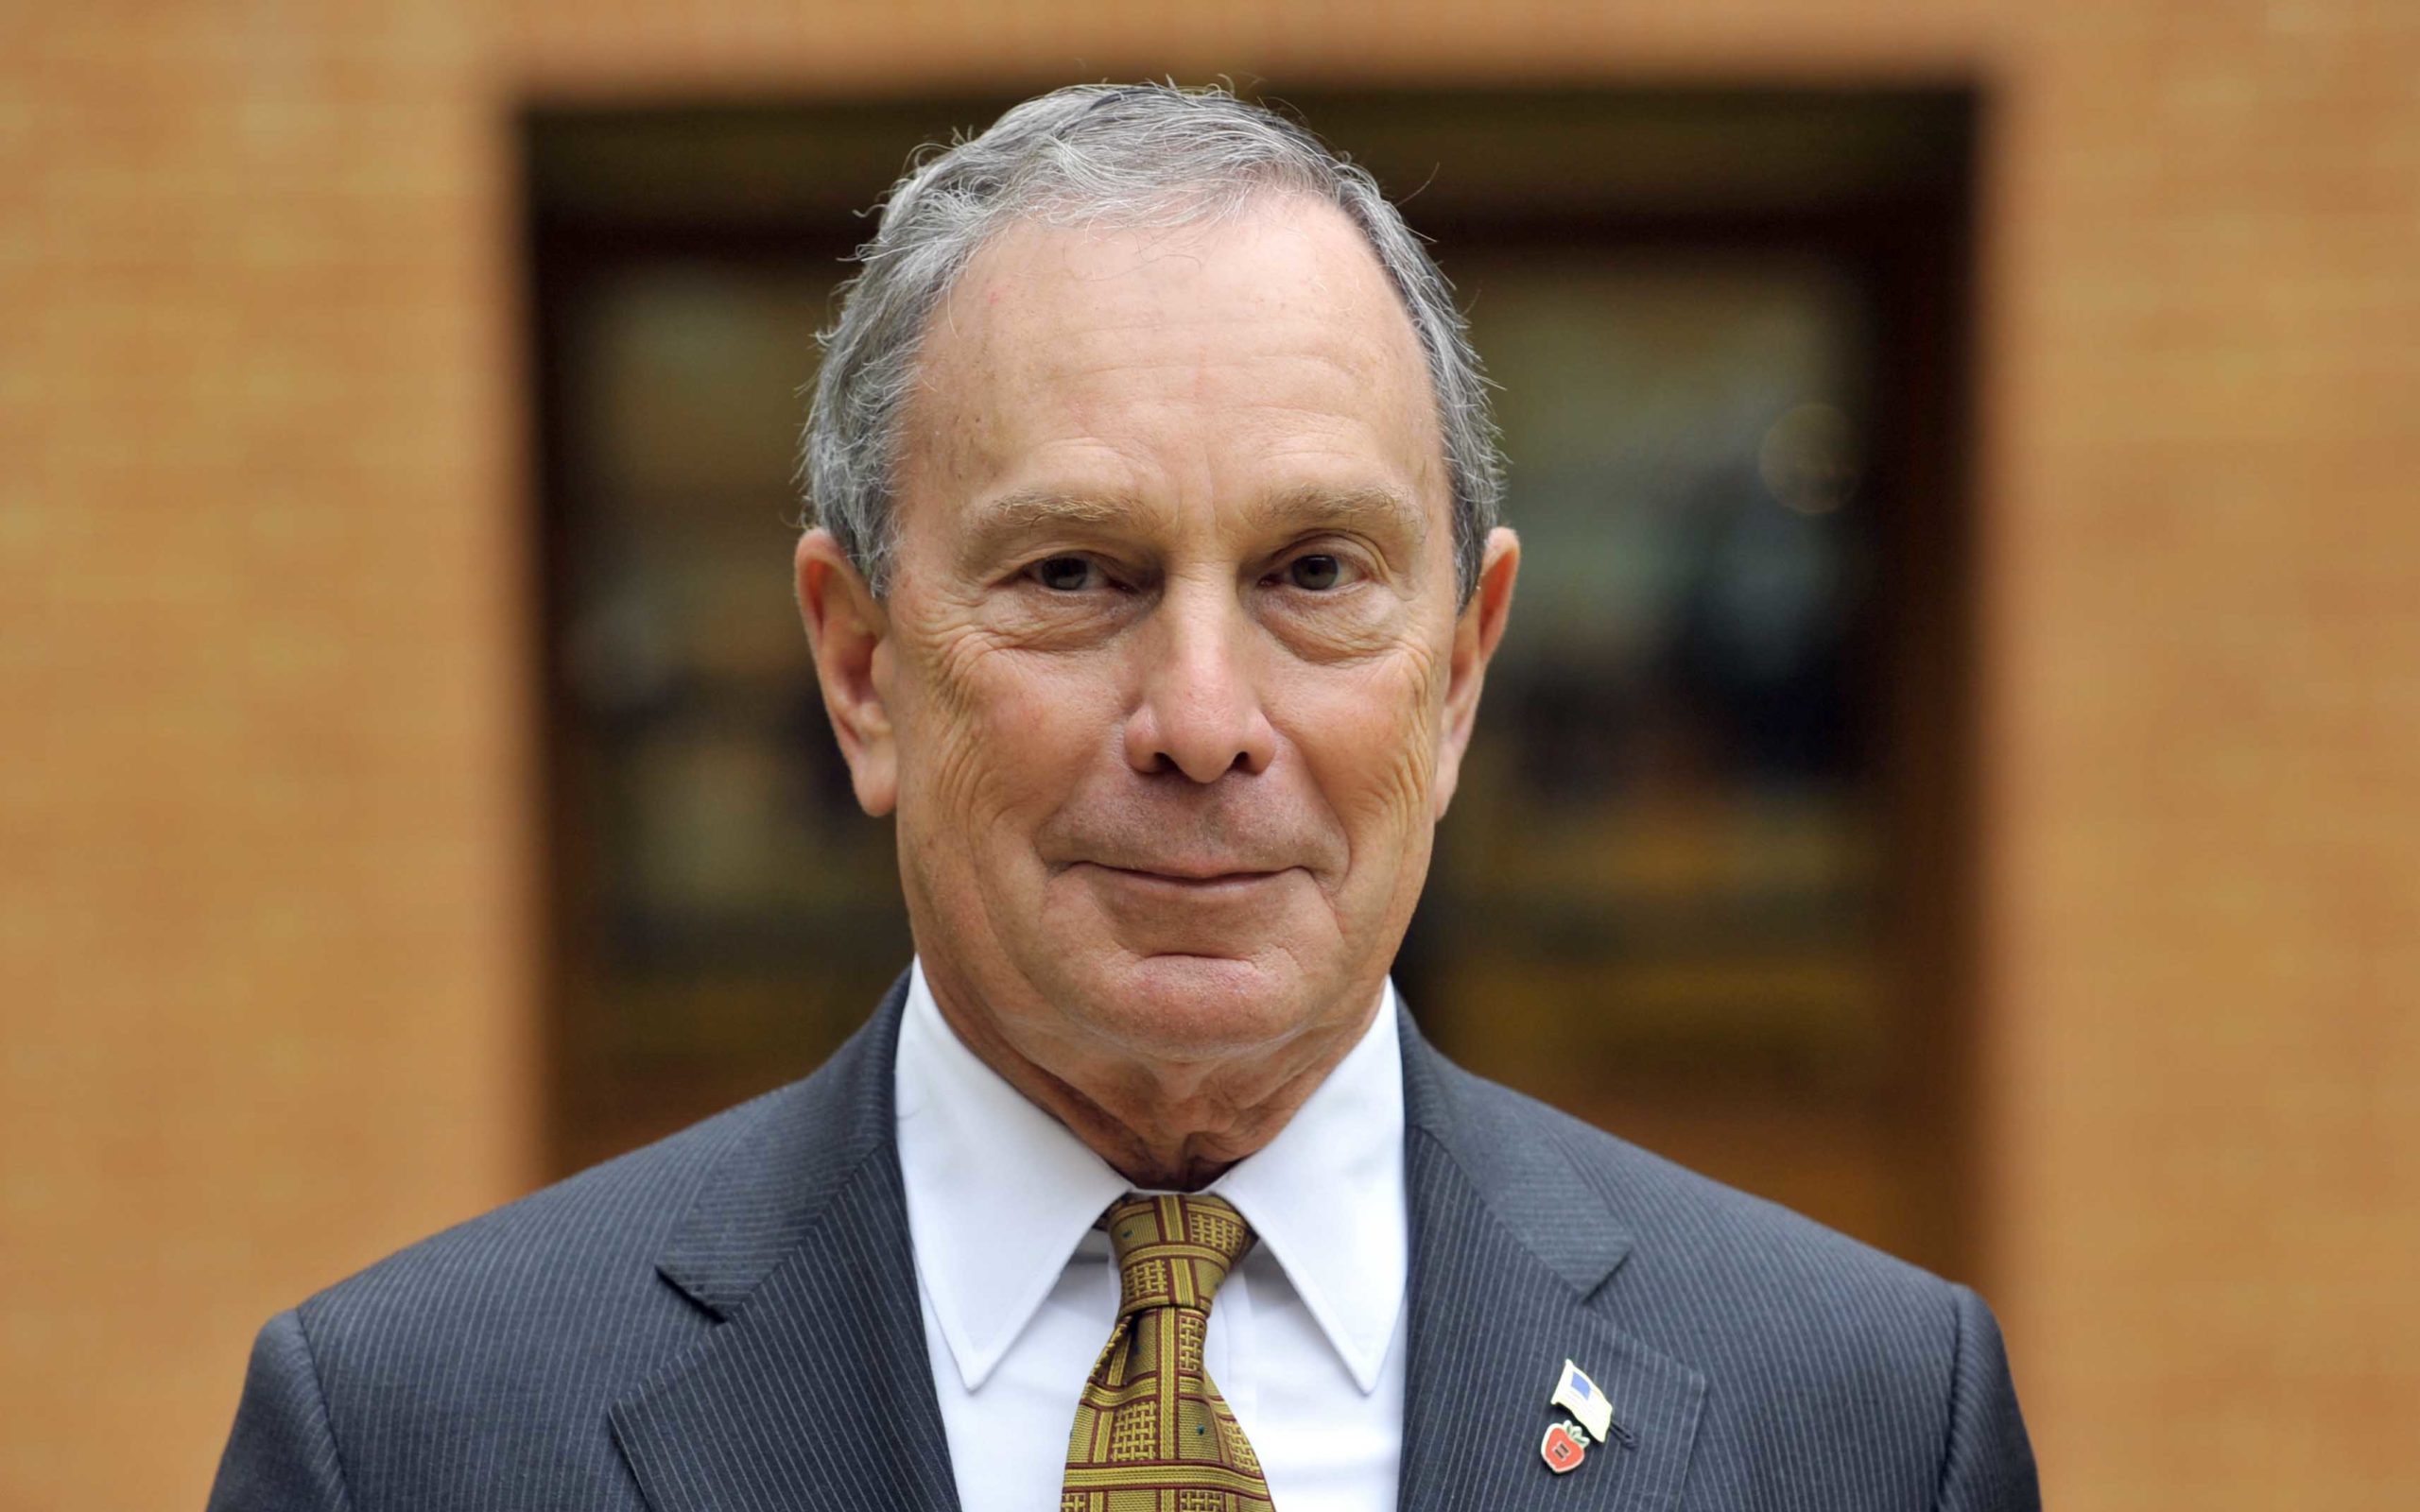 Morehouse School Of Medicine Students Receive $100K Each After Mike Bloomberg Donates $26.3M